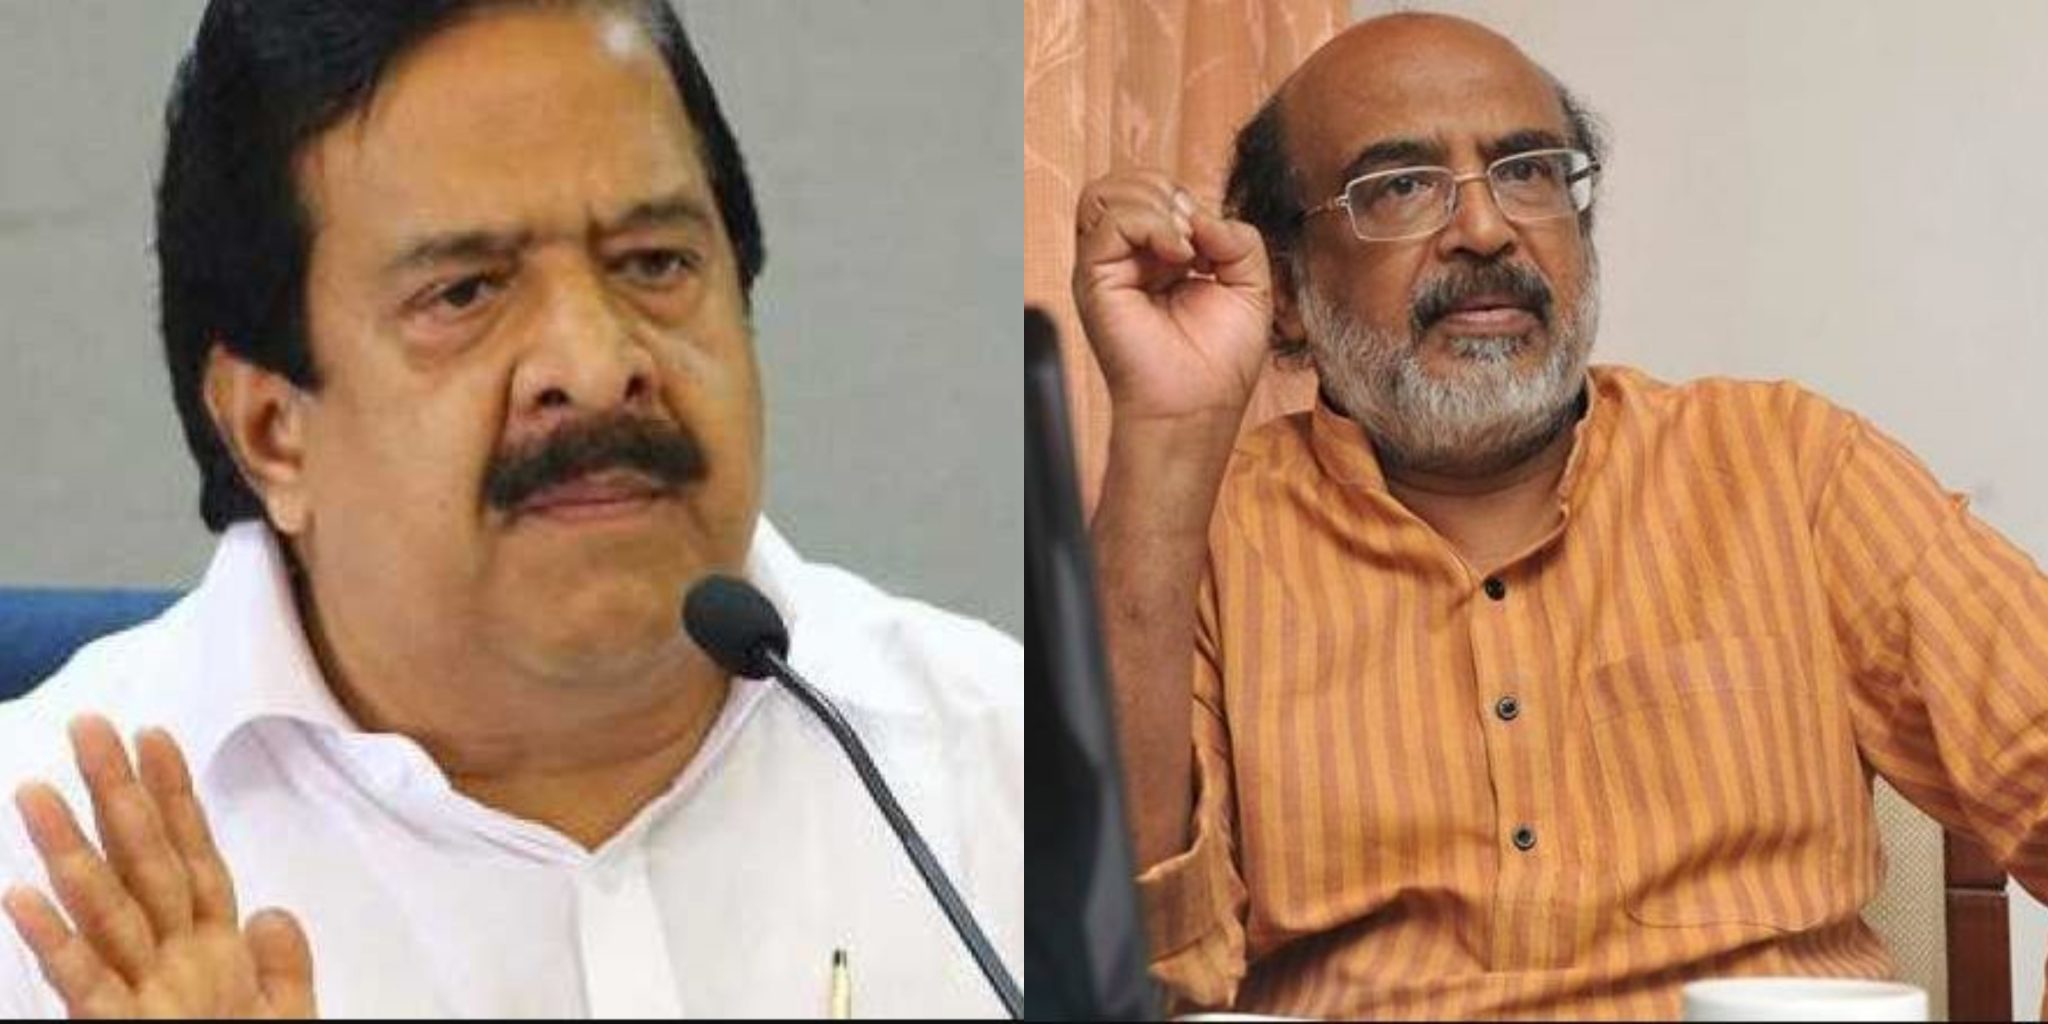 Finance Minister who lied to public should resign says Ramesh Chennithala